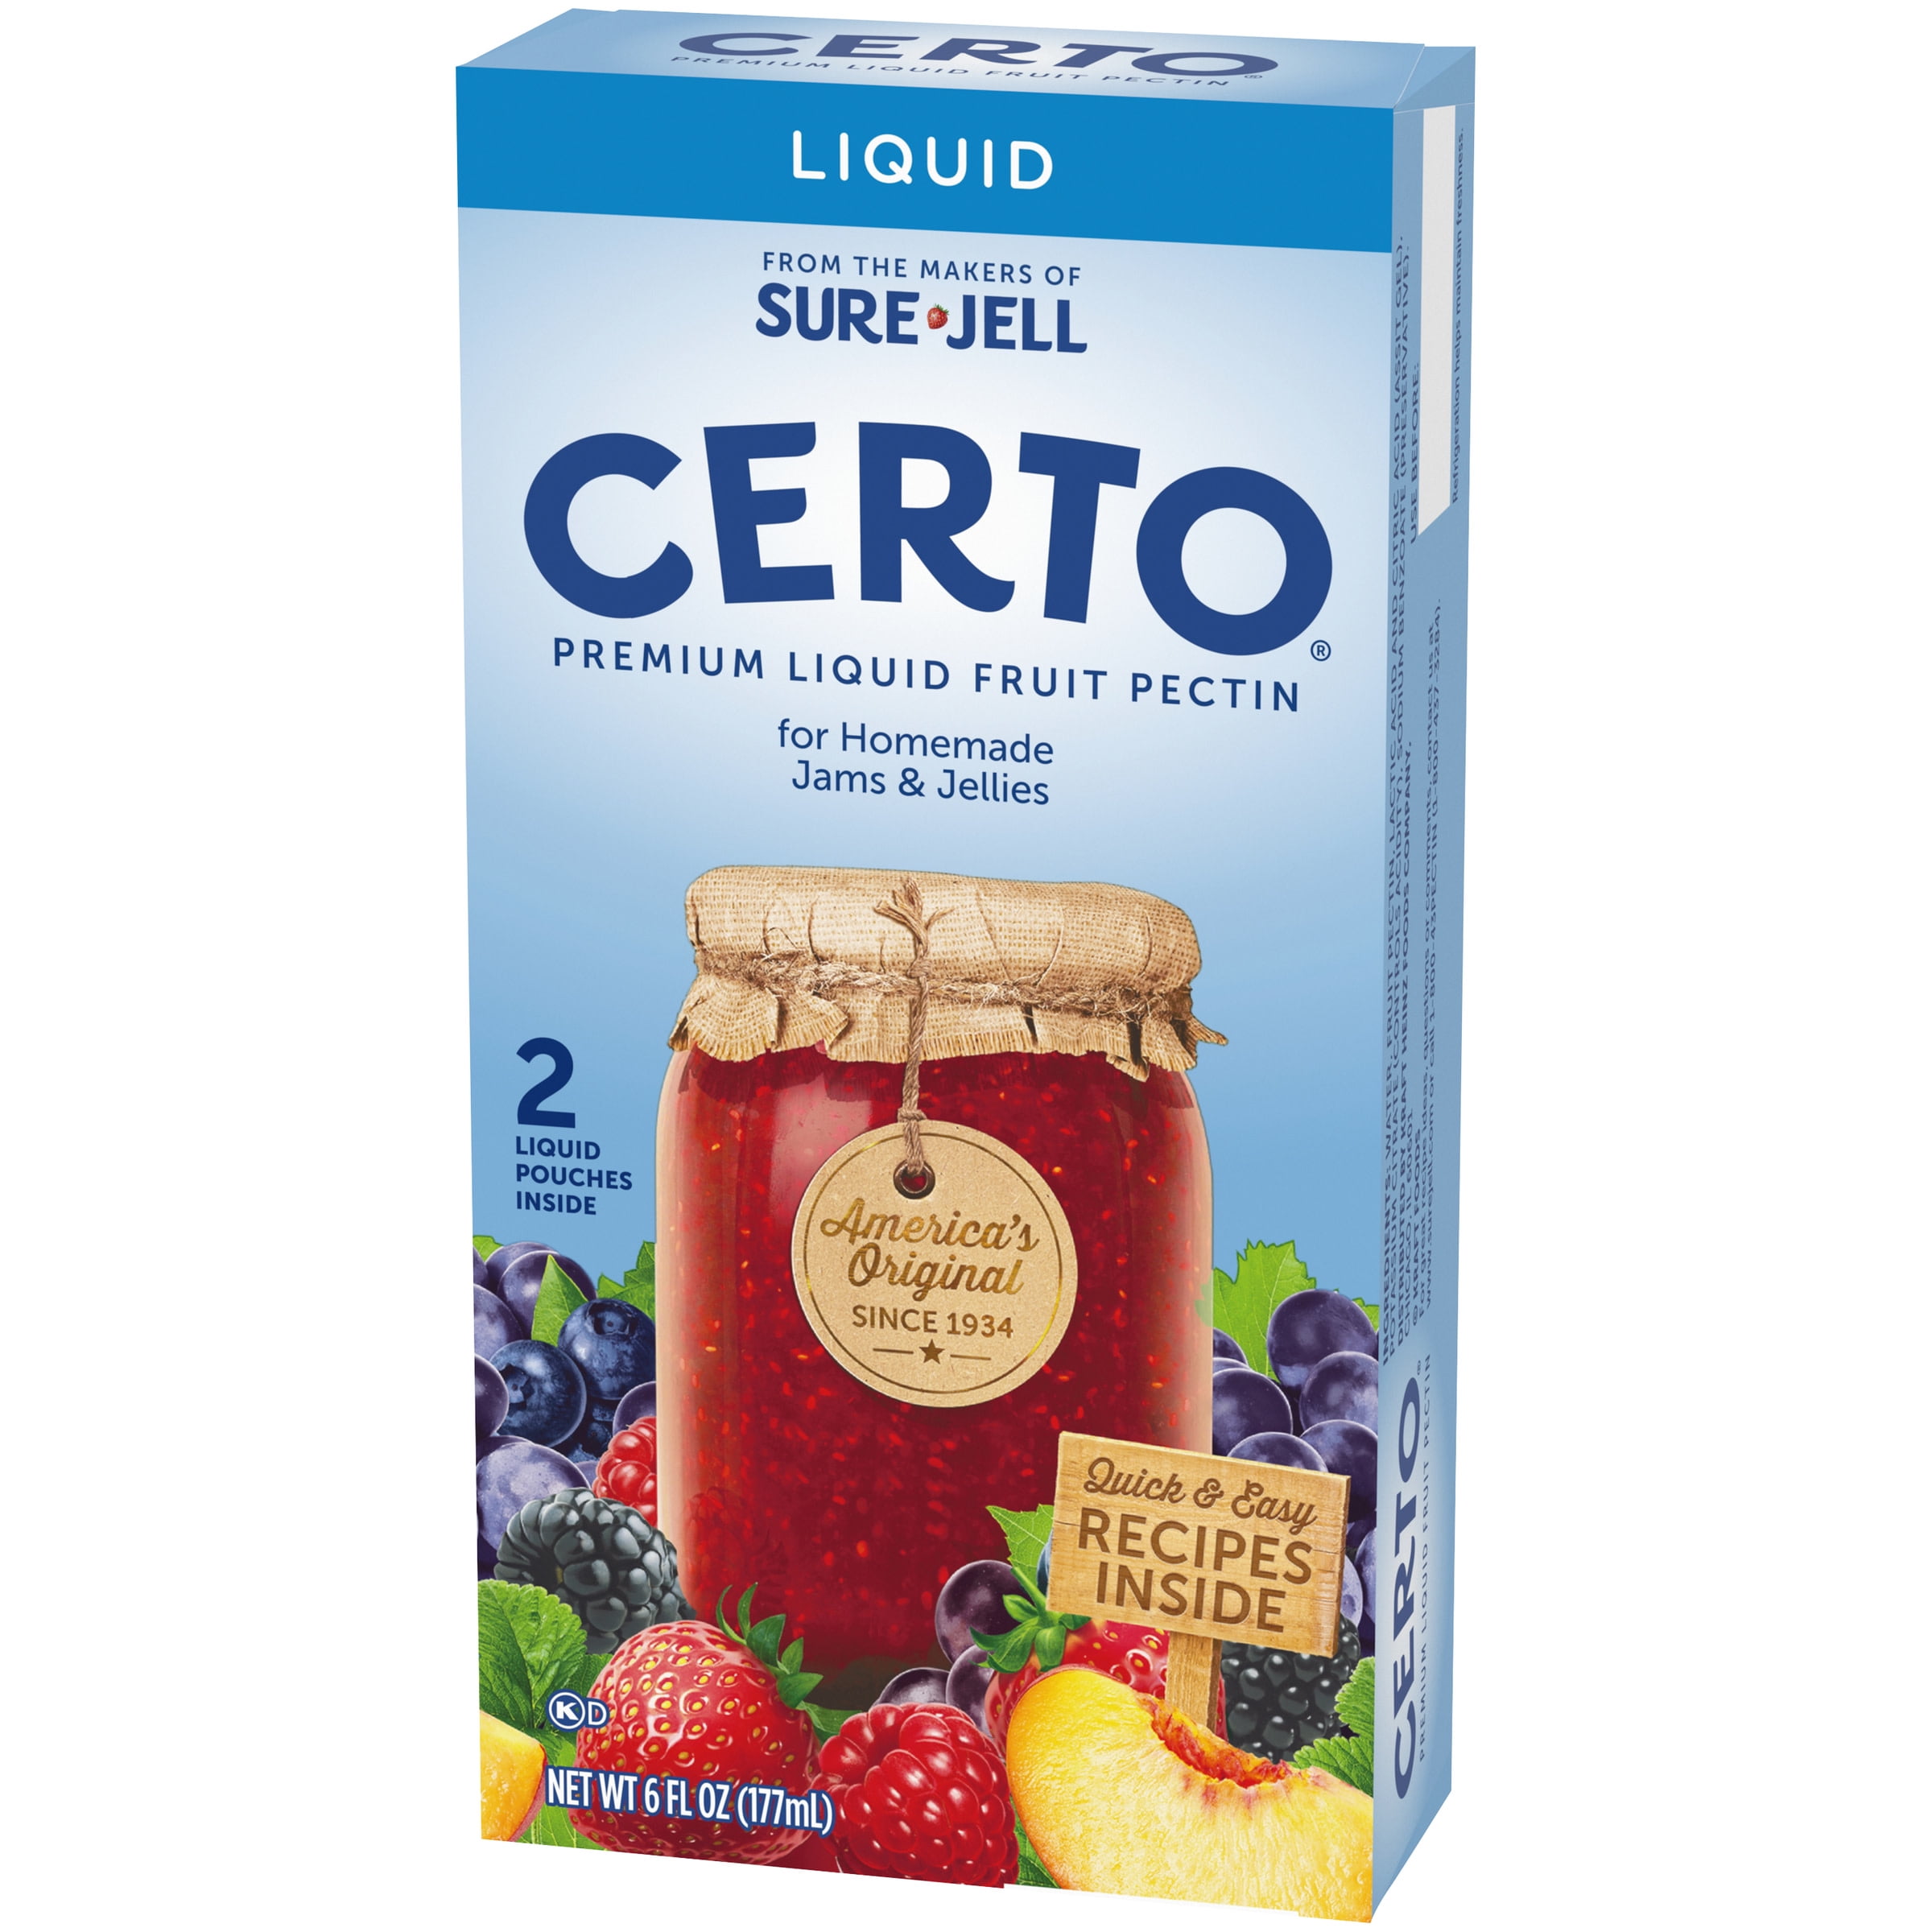 Where To Find Certo In Walmart + Other Grocery Stores?